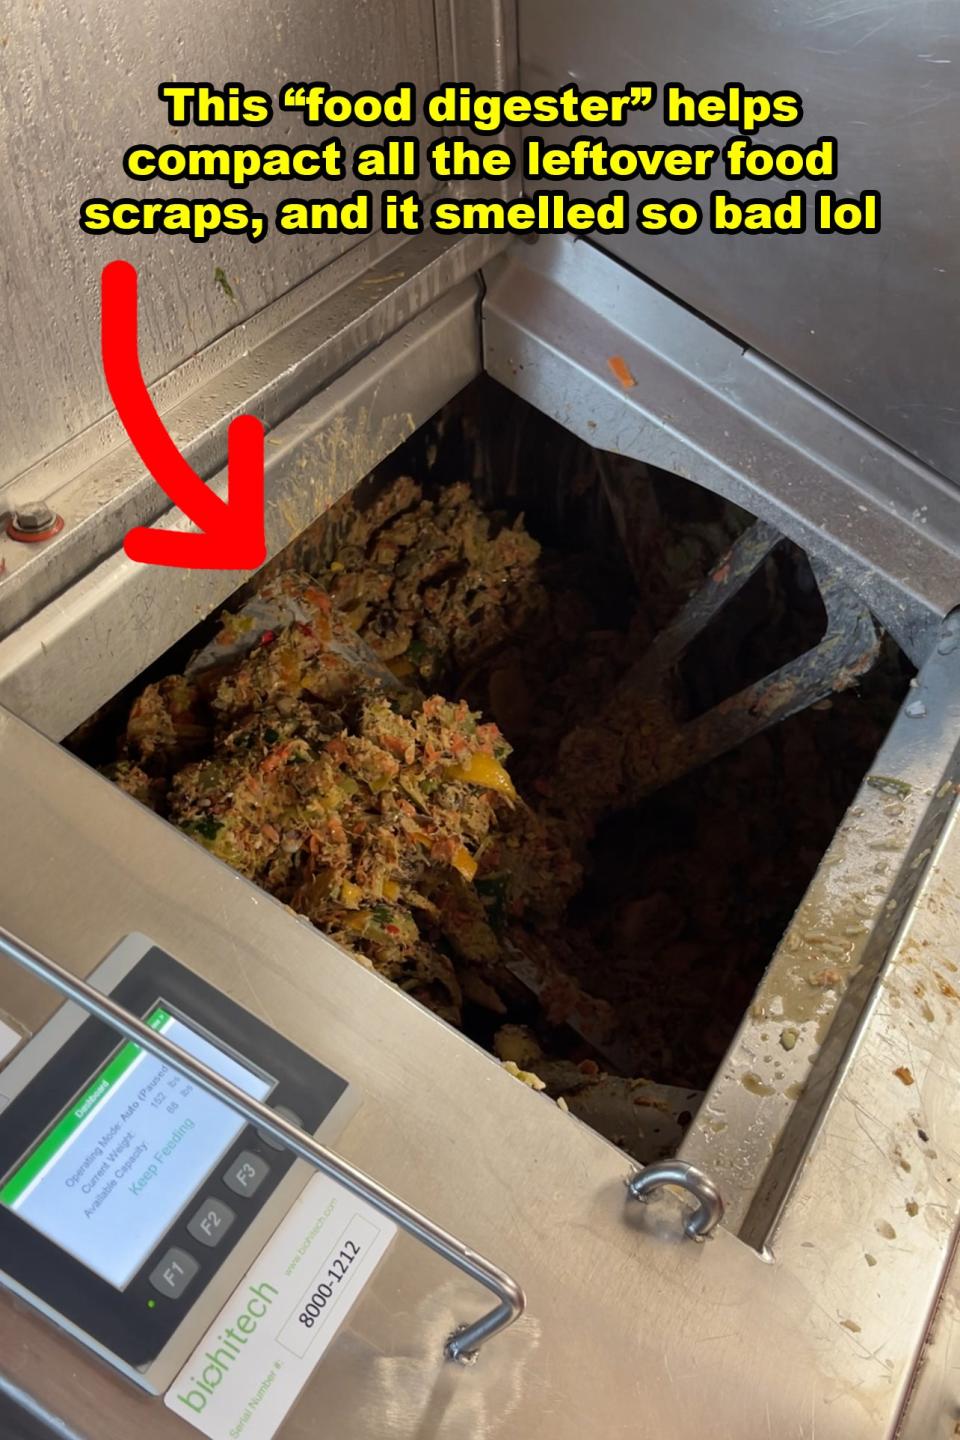 Food waste inside a commercial food digester with an annotation about its function and odor